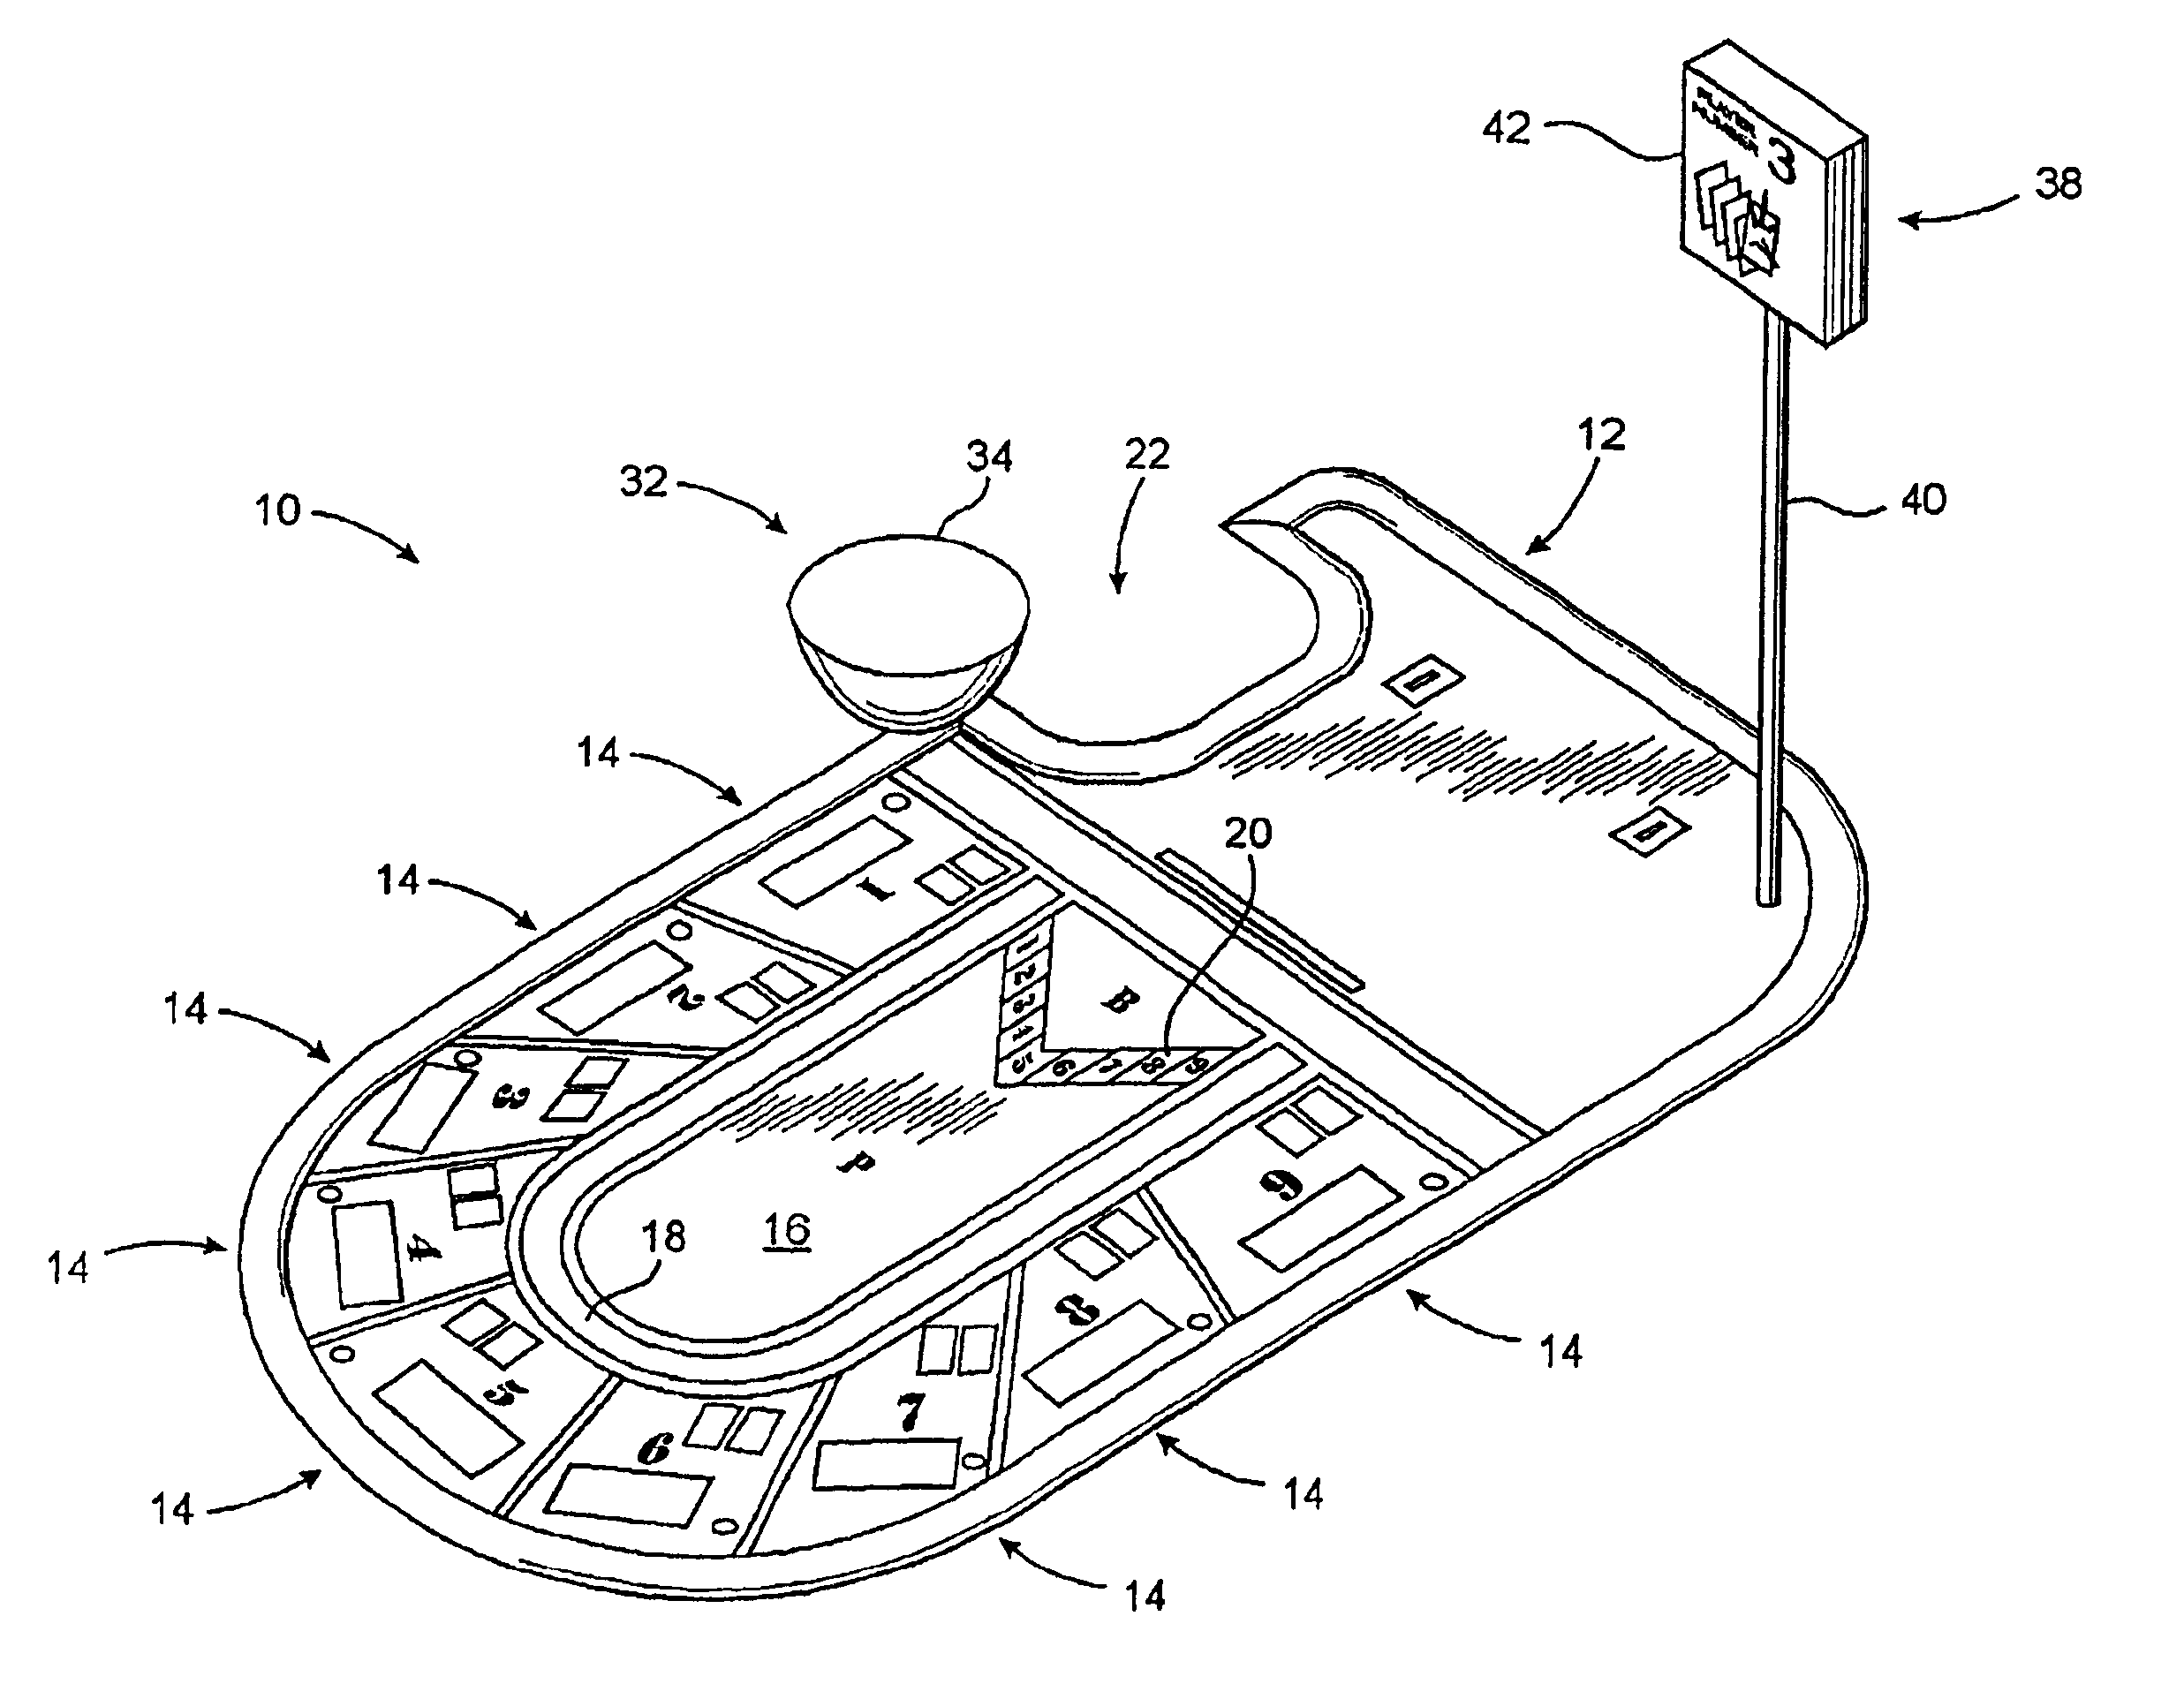 Baccarat gaming assembly and method of playing baccarat